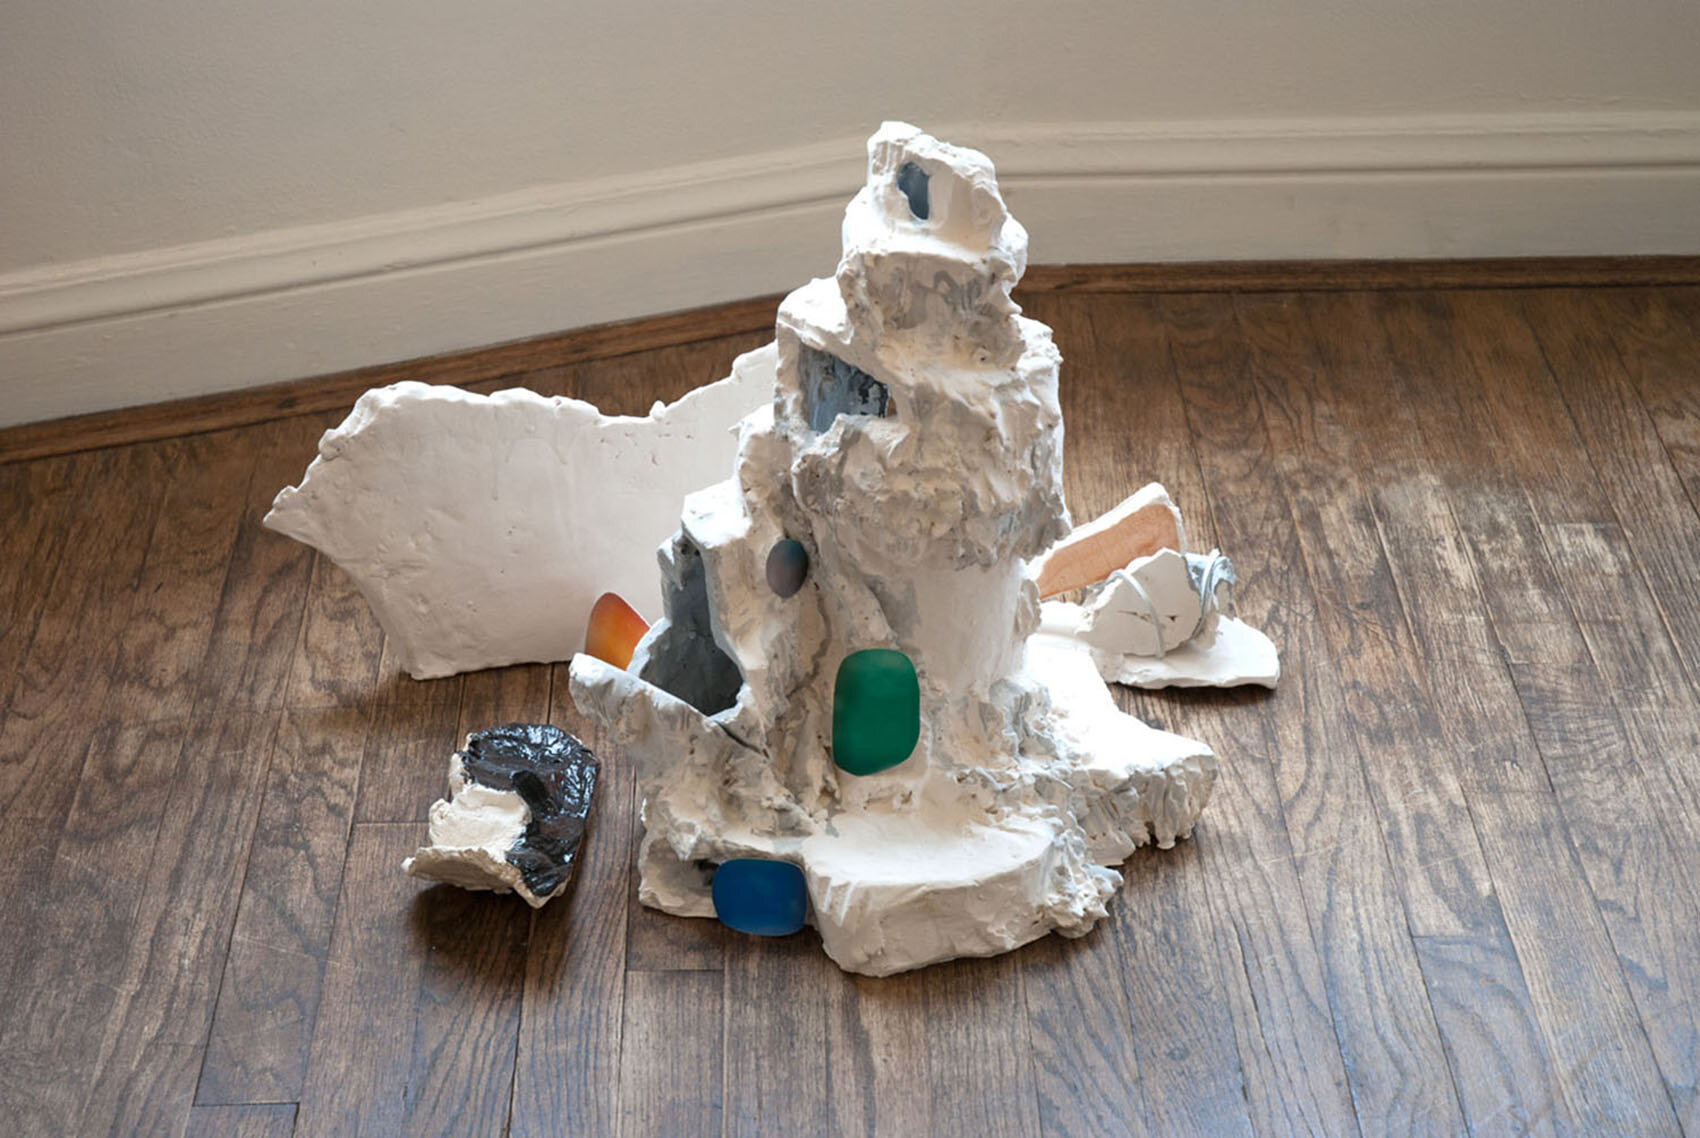   The Next Thing Happens (For Hewicker) , 2011, glazed ceramic, pigment prints, leather, 18 x 32 x 19 inches 